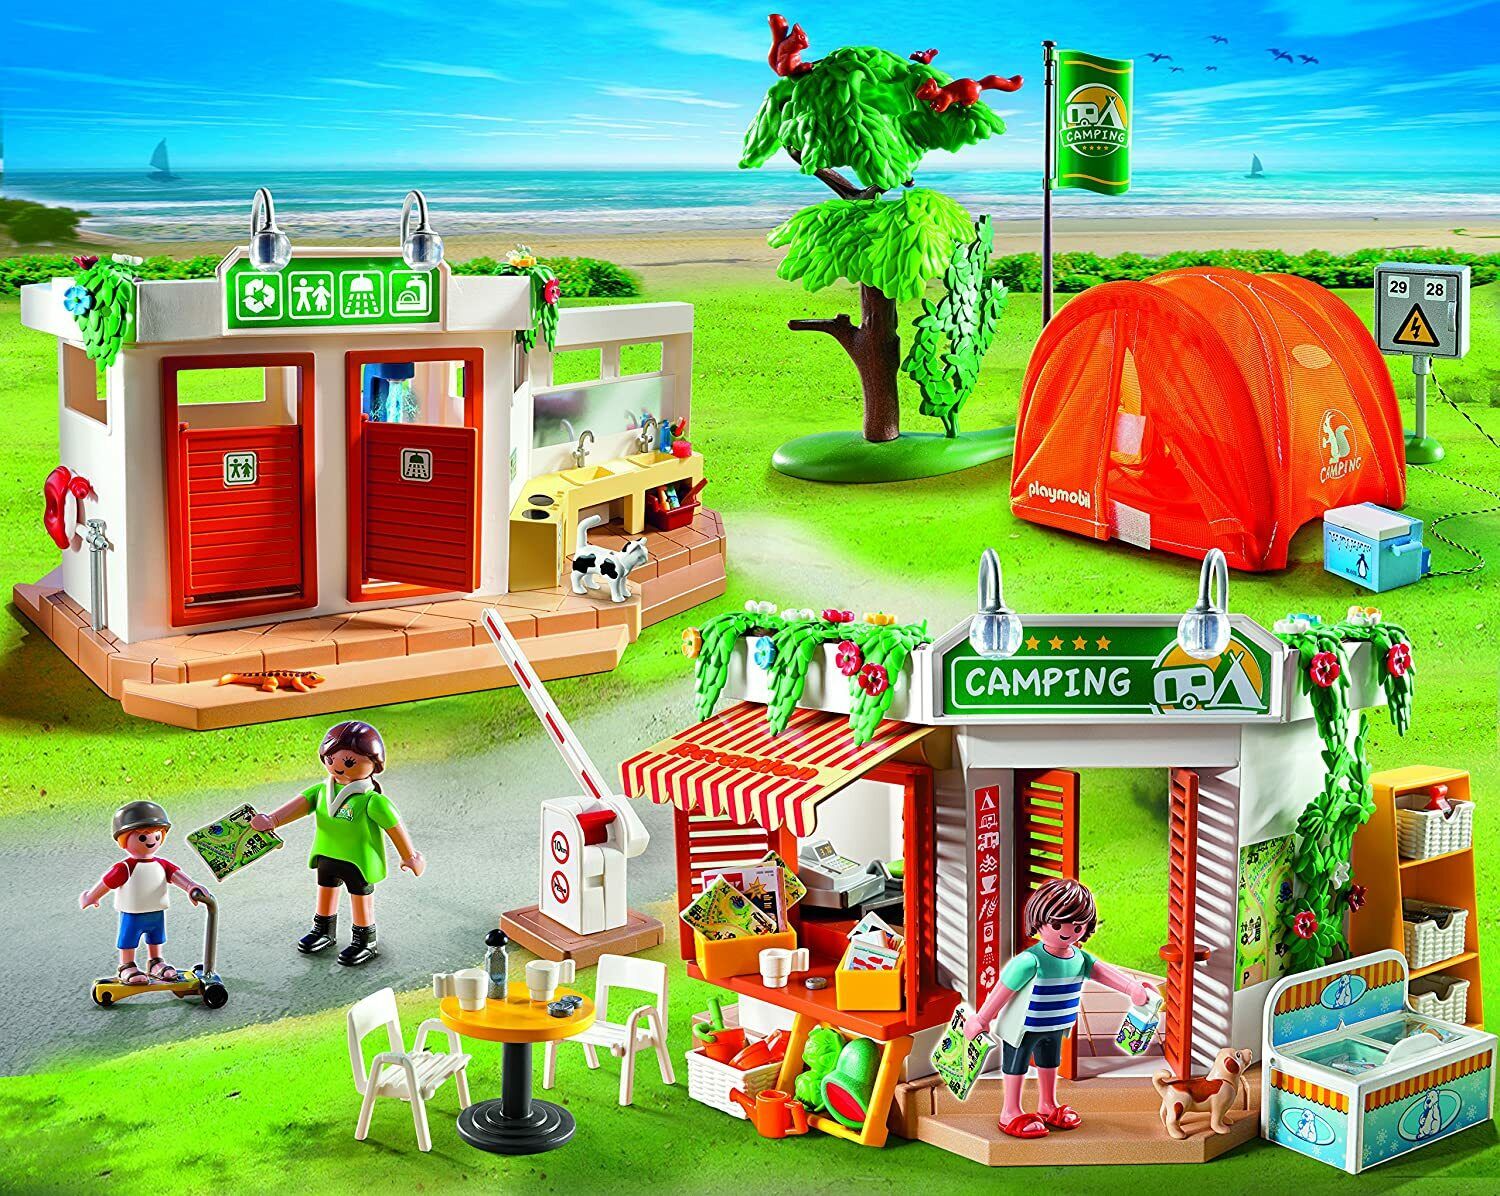 PLAYMOBIL 5432 Summer Fun Camp Site, Tent, Cafe - Retired!